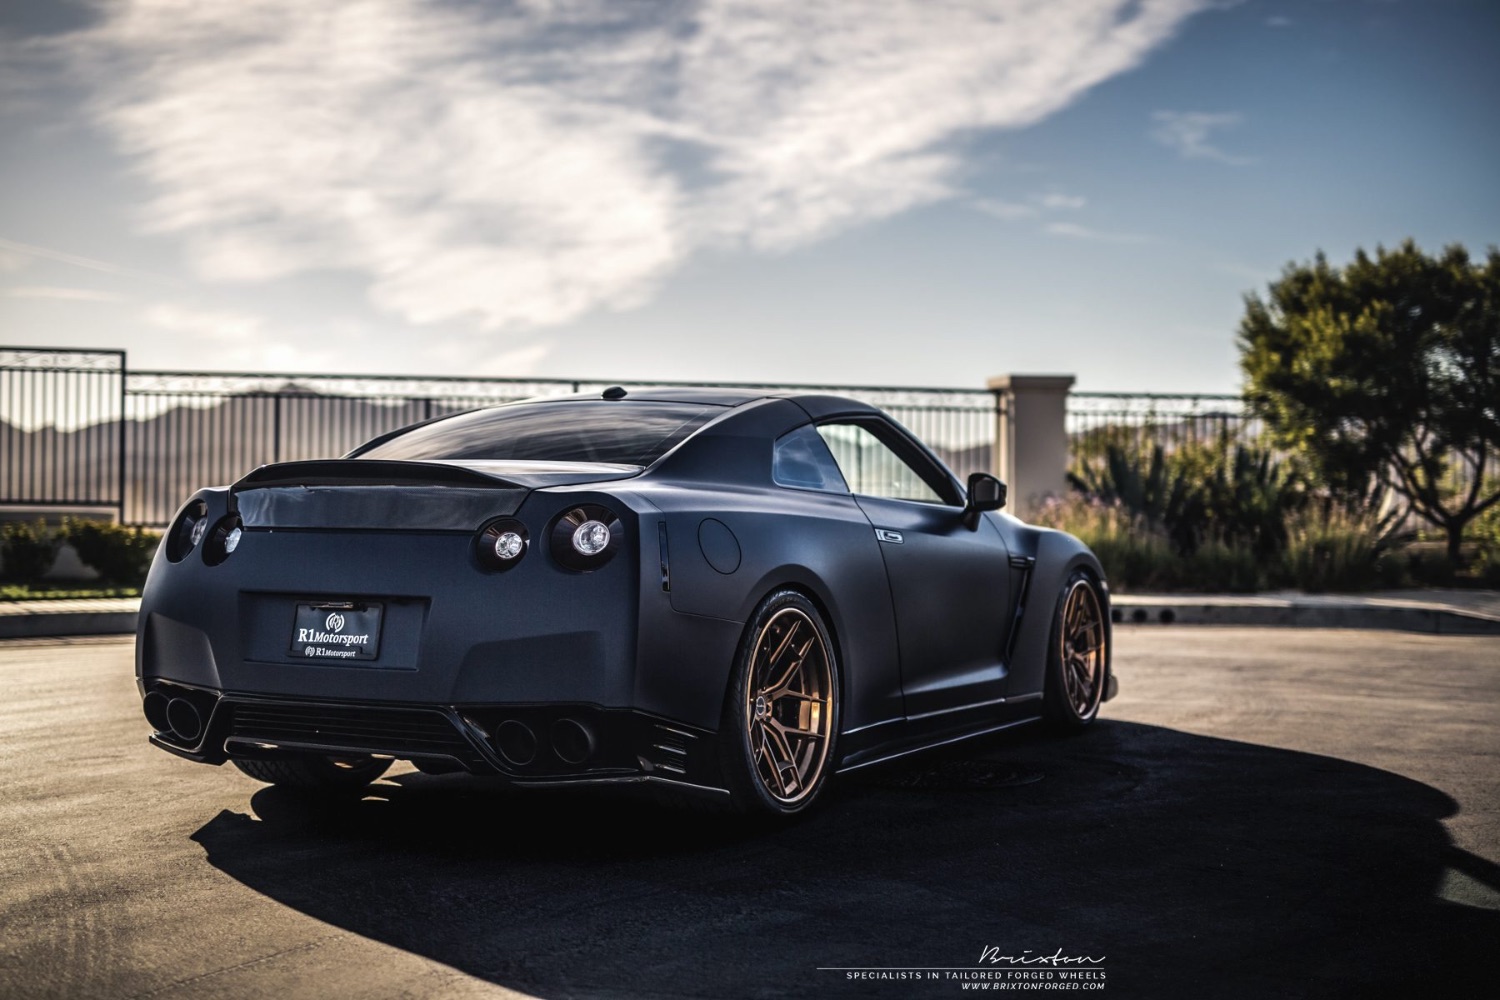 brixton-forged-matte-blue-r35-gtr-21-brixton-forged-wr5-targa-series-3-piece-forged-wheels-olympic-bronze-6-1800x1200